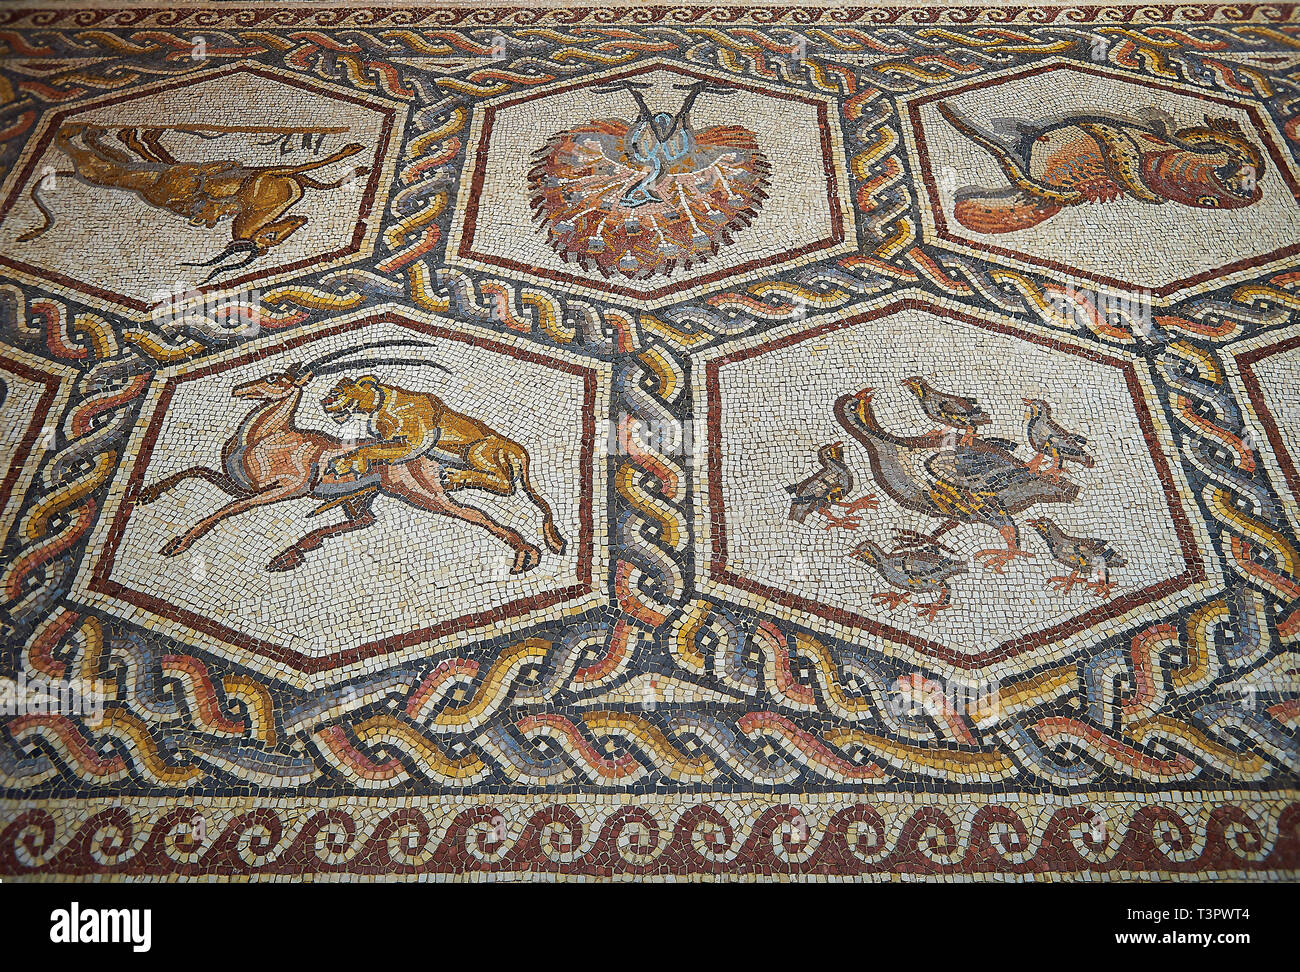 https://c8.alamy.com/comp/T3PWT4/animals-and-birds-from-the-3rd-century-roman-mosaic-villa-floor-from-lod-near-tel-aviv-israel-the-roman-floor-mosaic-of-lod-is-the-largest-and-best-T3PWT4.jpg